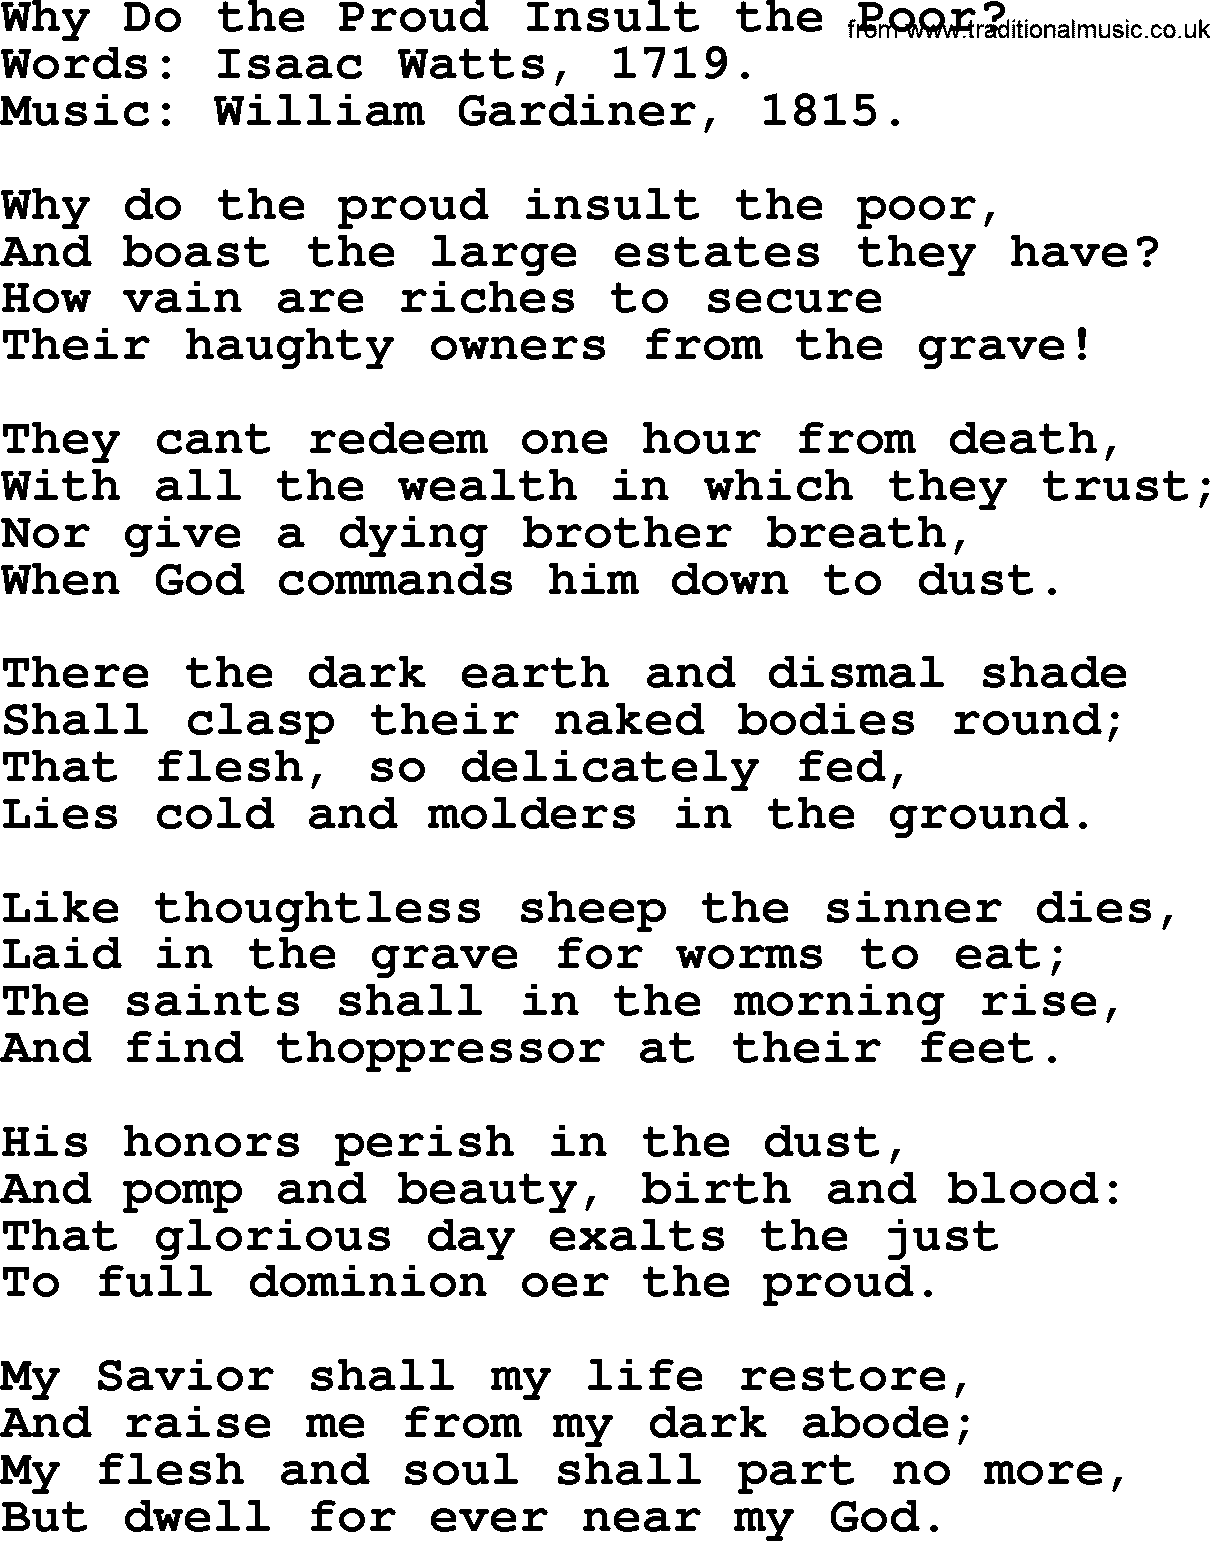 Isaac Watts Christian hymn: Why Do the Proud Insult the Poor_- lyricss